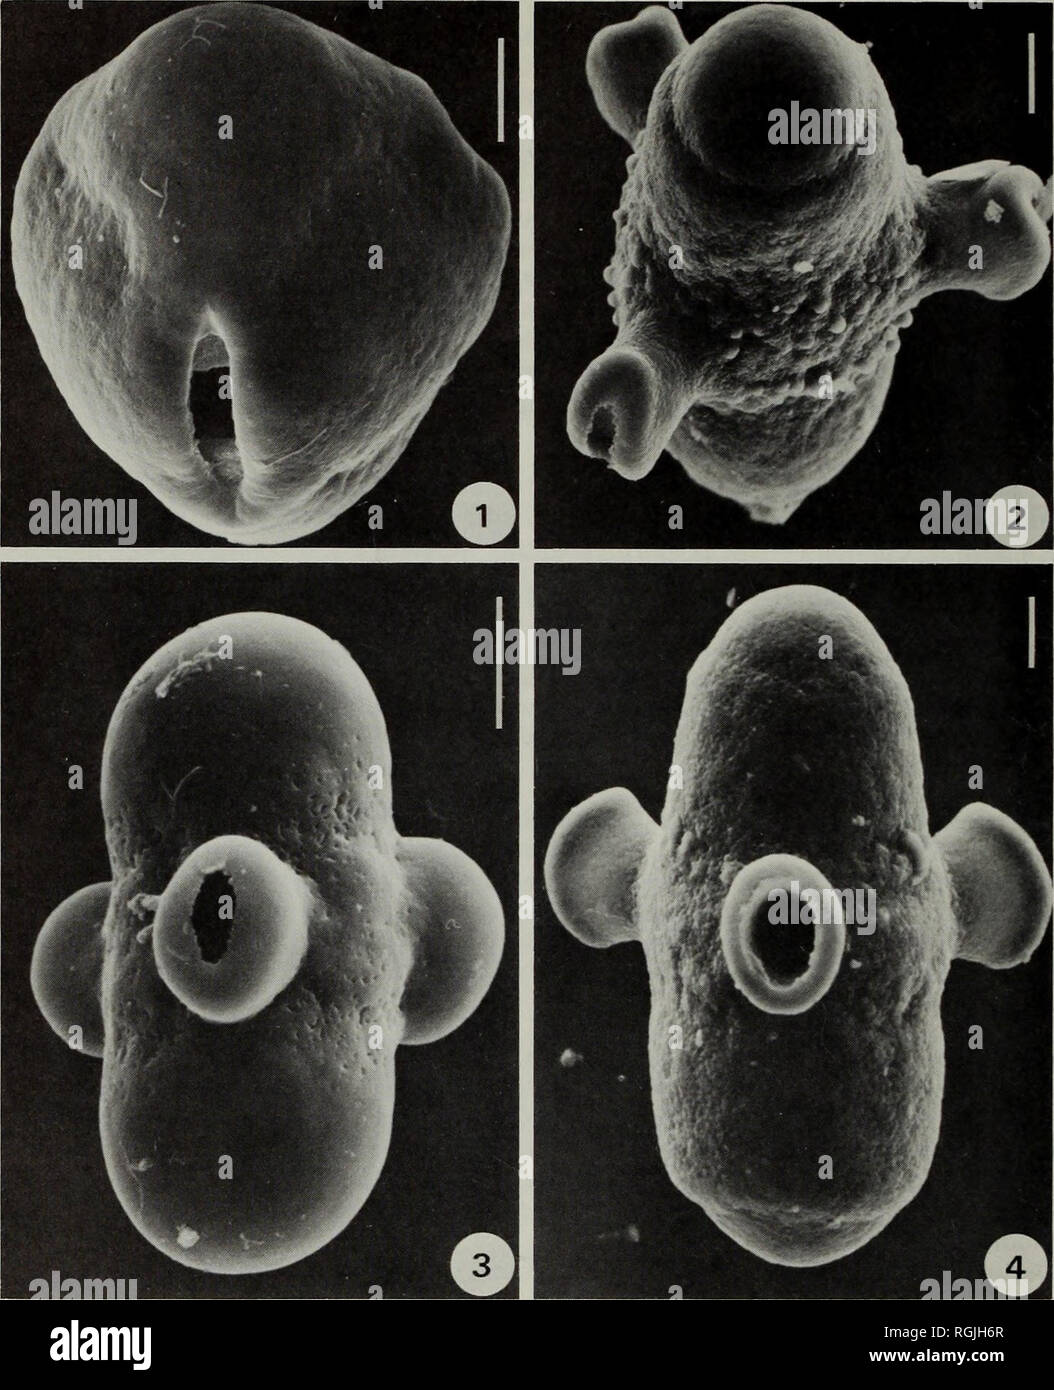 . Bulletin of the British Museum (Natural History) Botany. M. J. CANNON &amp; J. F. M. CANNON. Fig. 1 Scanning electron micrographs of pollen types. Scale lines 20 [lm. 1. Acanthocalyx-type, A. nepalensis (Polunin, Sykes &amp; Williams 4536), slightly oblique equatorial view showing a colpate ectoaperture. 2. Morma-type, M. persica (Davis, Dodds &amp; Cetik 19068), slightly oblique polar view showing verrucate ornamentation at equator. 3. Cryptothladia-type, C. chinensis (Licent 4548), equatorial view showing domed apertural protru- sions. 4. Mon«a-type, M. coulteriana (Vassiljeva 5487), equat Stock Photo